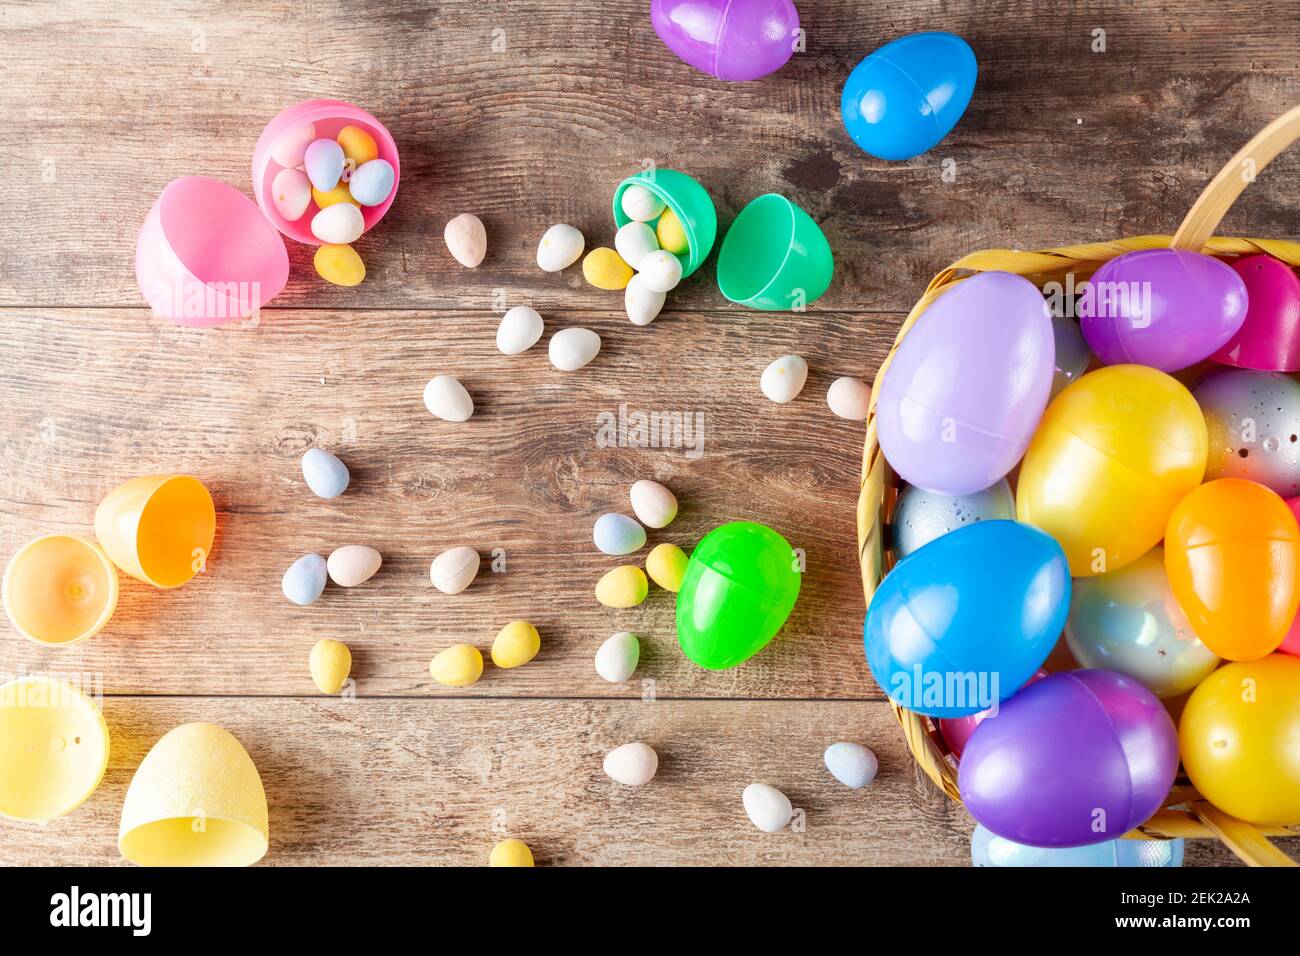 Flat lay image of plastic easter eggs being filled with chocolates before easter egg hunt. It is a fun activity for children who search for eggs and g Stock Photo